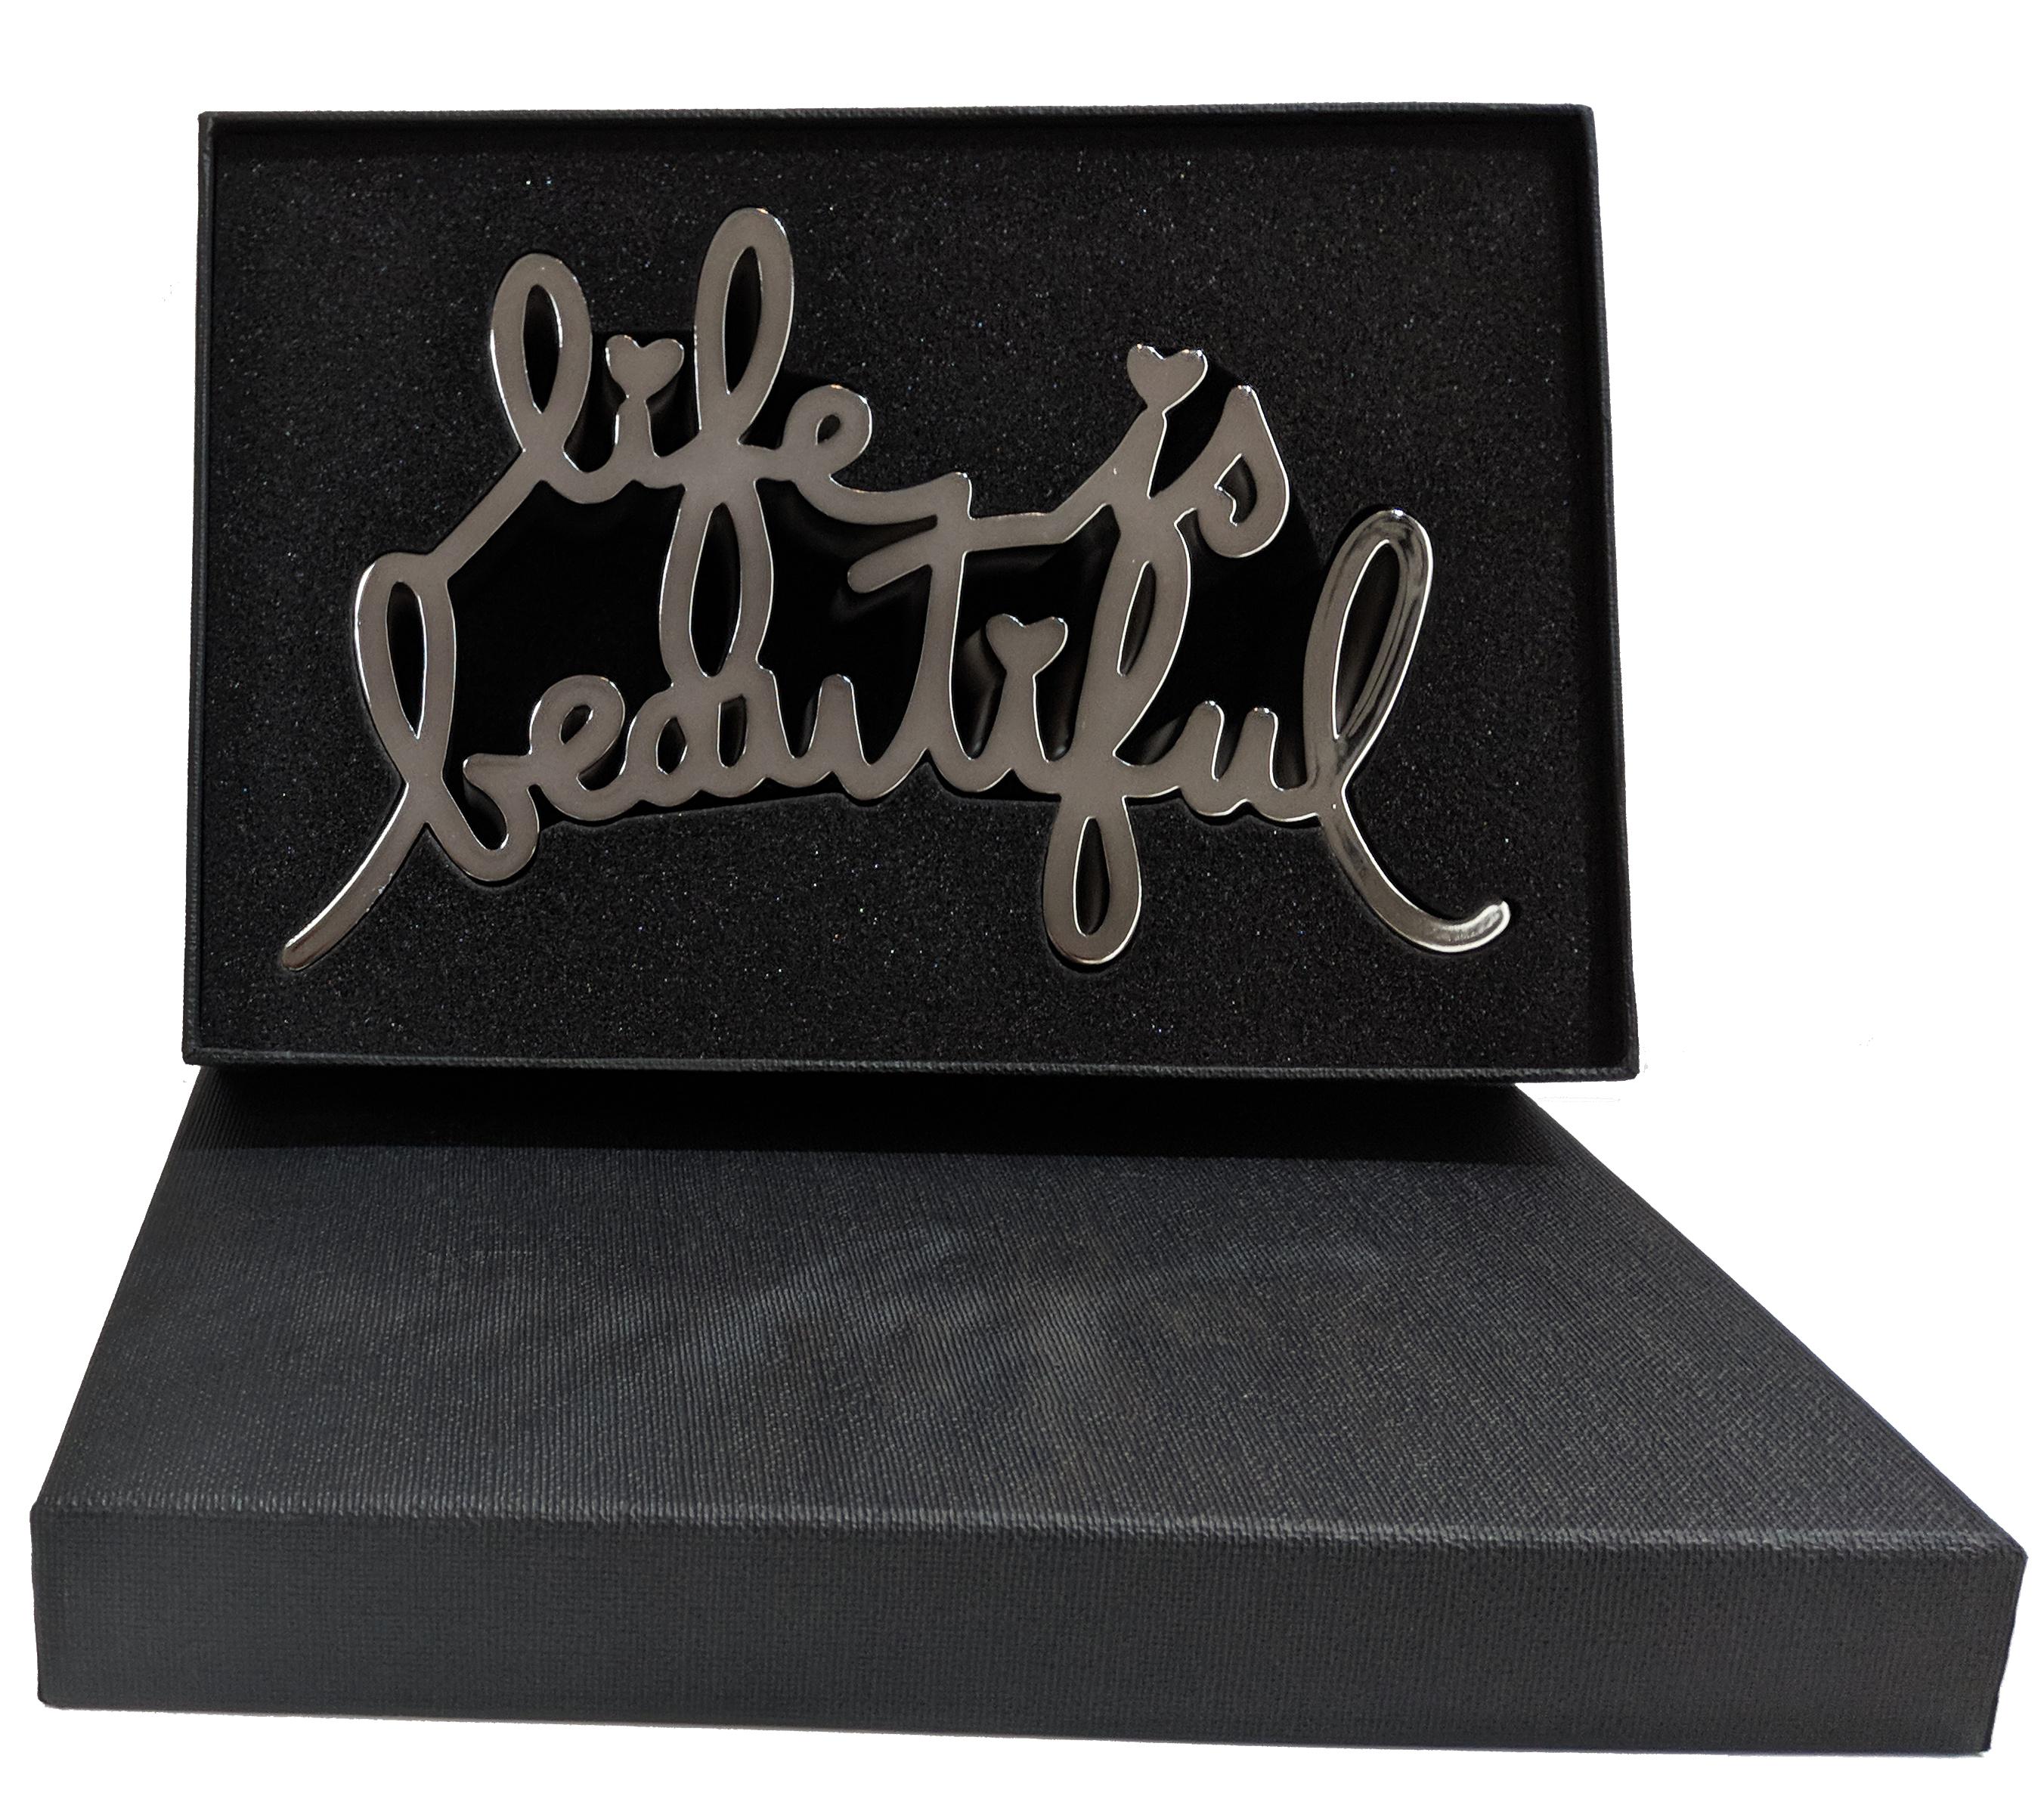 LIFE IS BEAUTIFUL (HARD CANDY SILVER) - Black Abstract Sculpture by Mr Brainwash